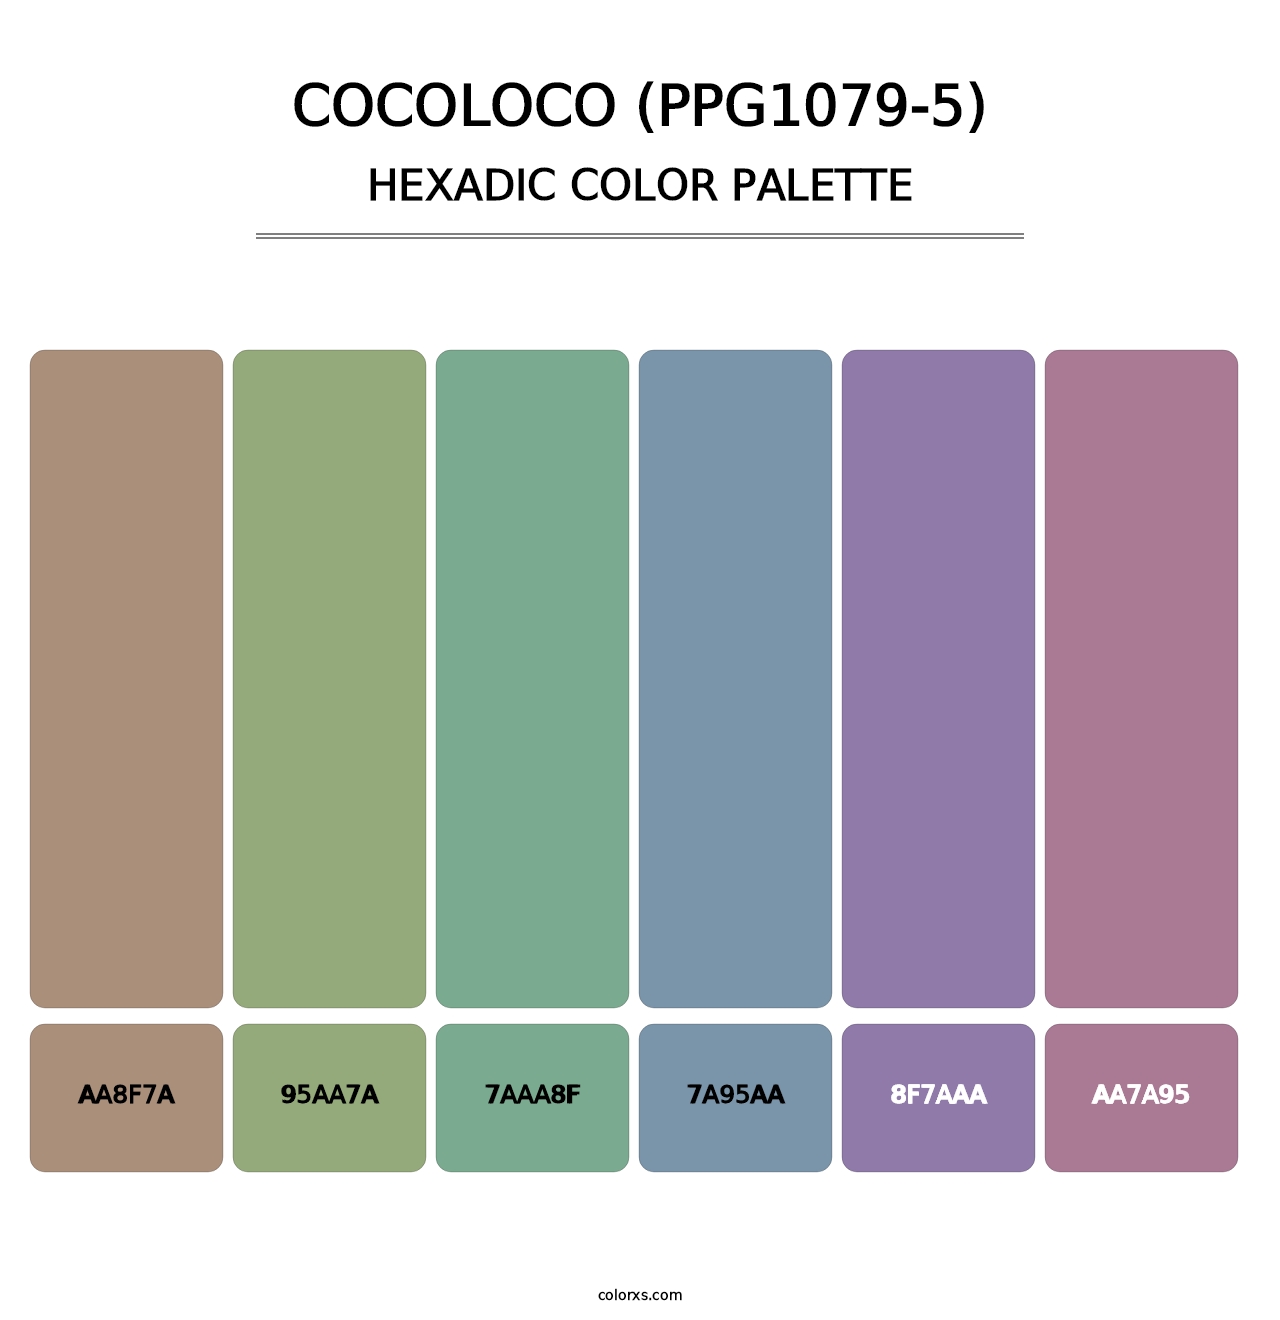 Cocoloco (PPG1079-5) - Hexadic Color Palette